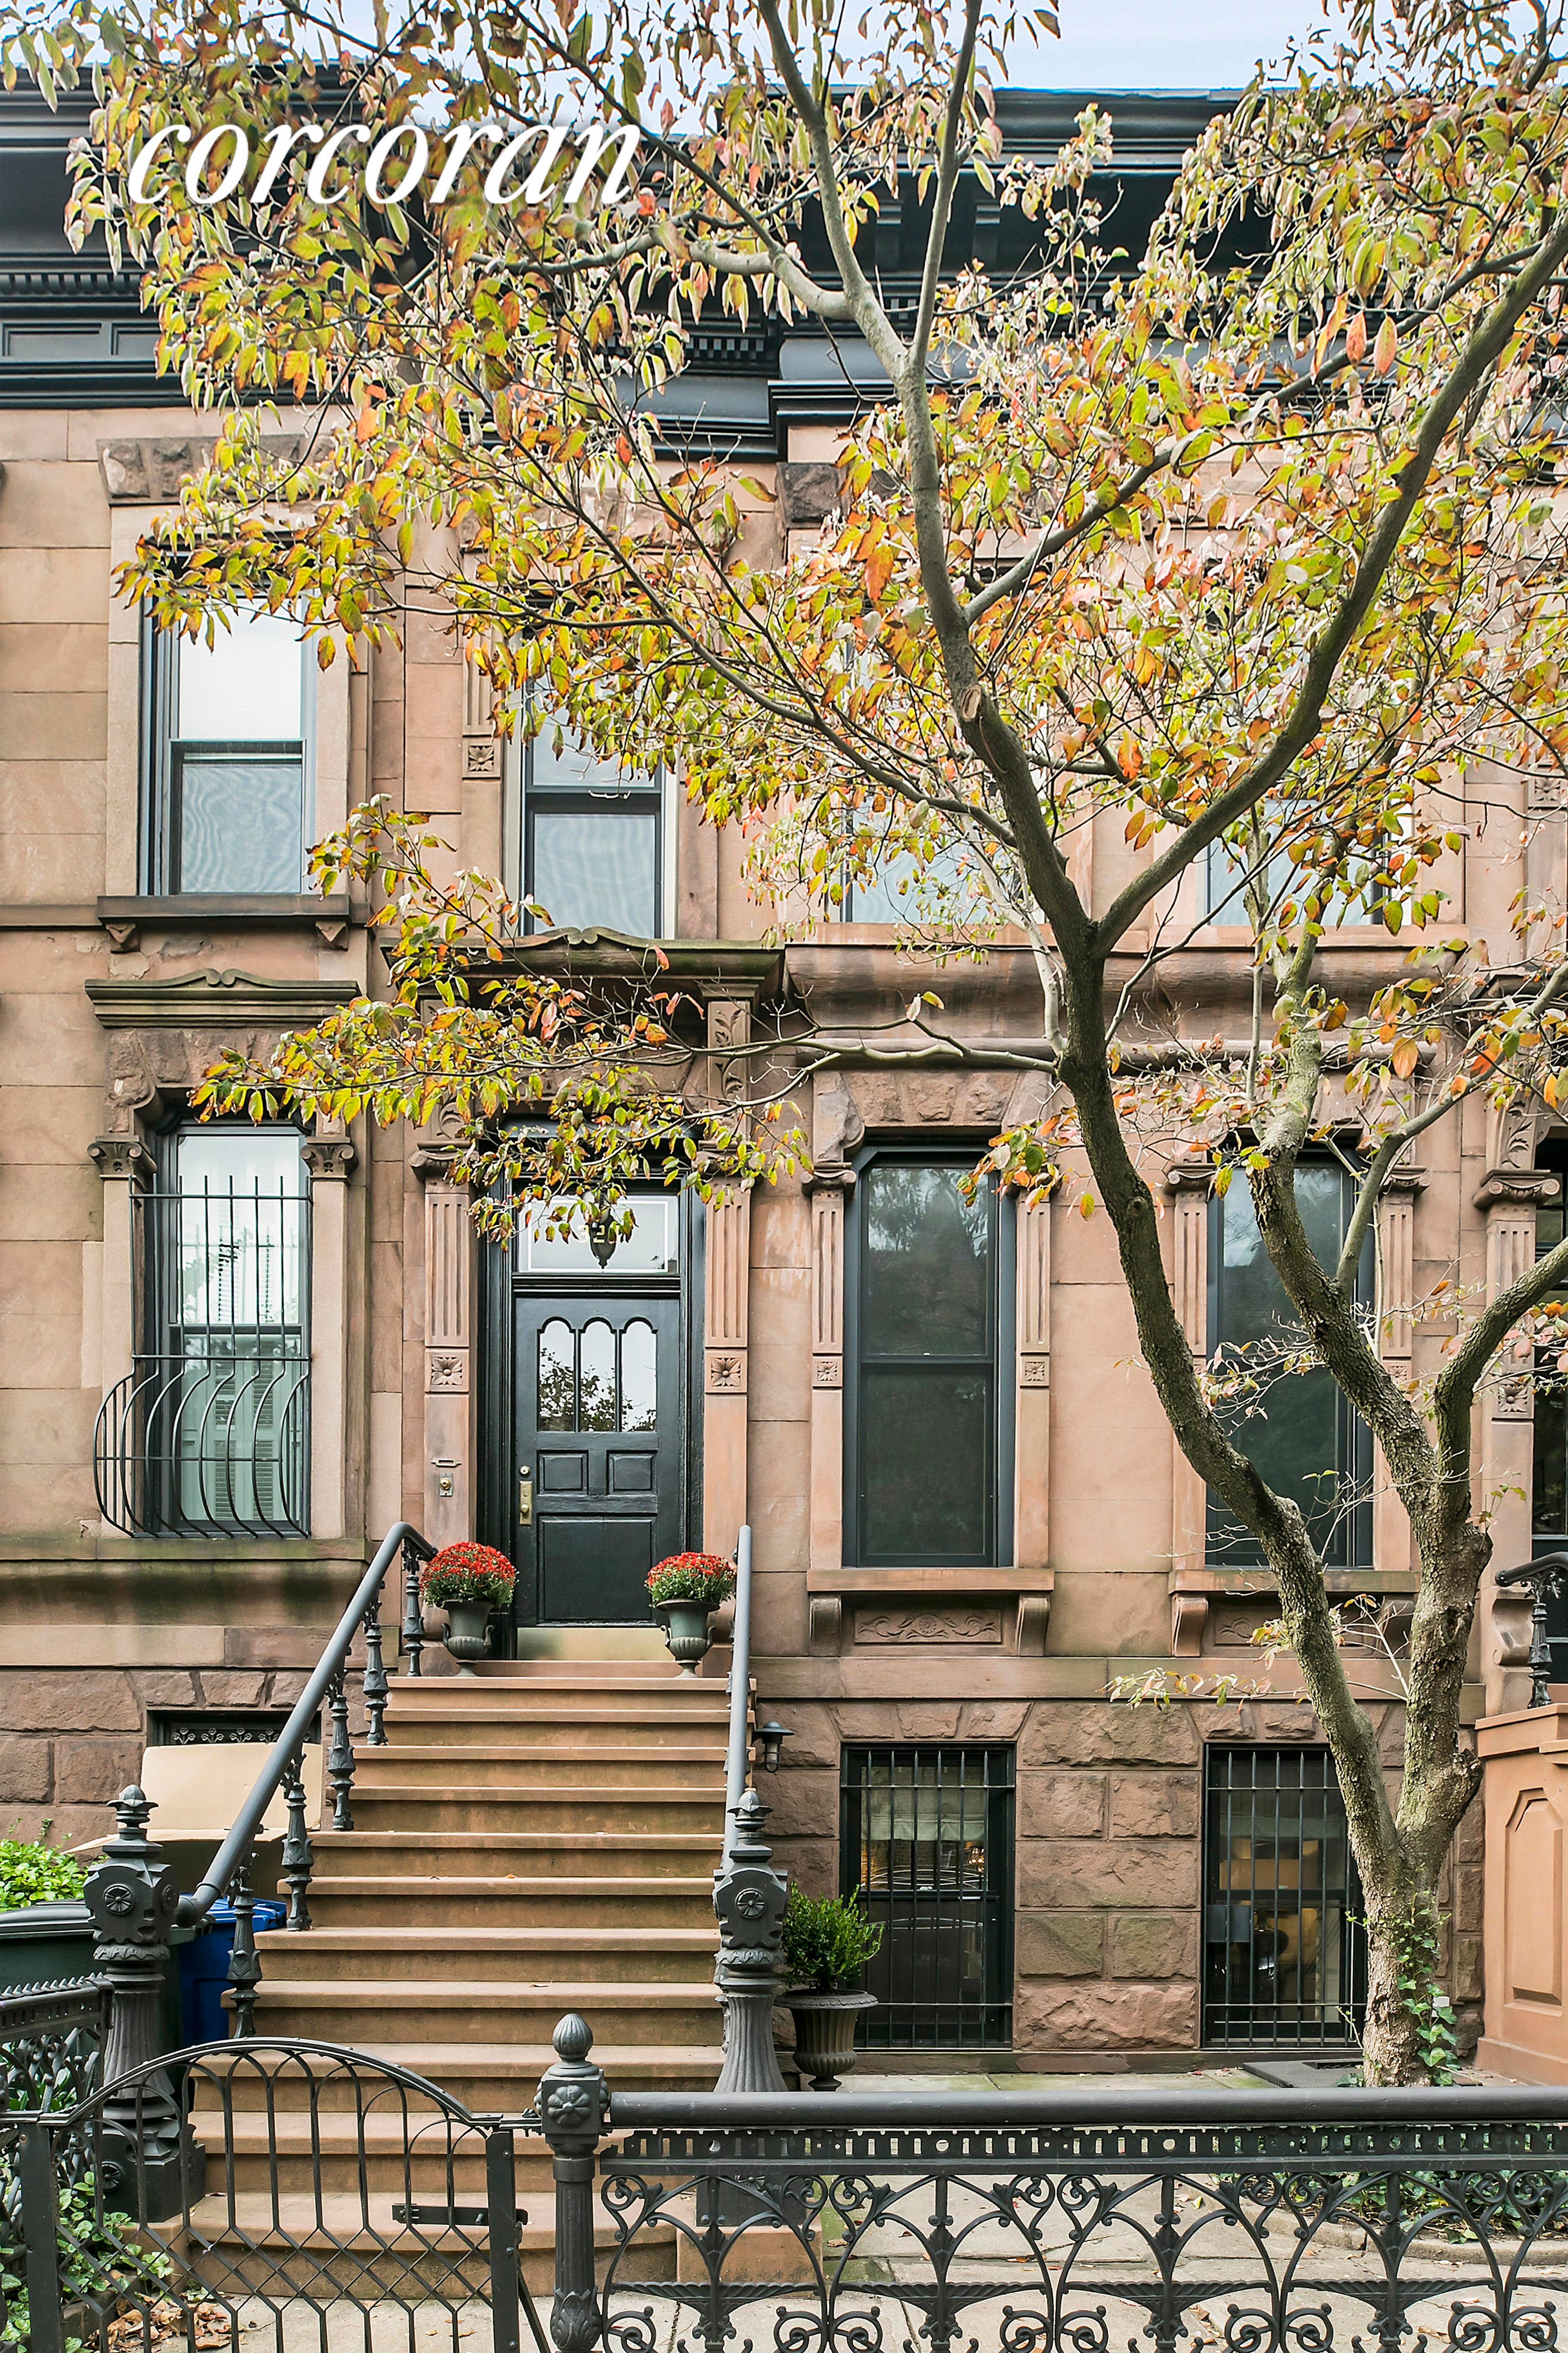 LUXURIOUS LIVING in a SUPERB Park Slope townhouse.